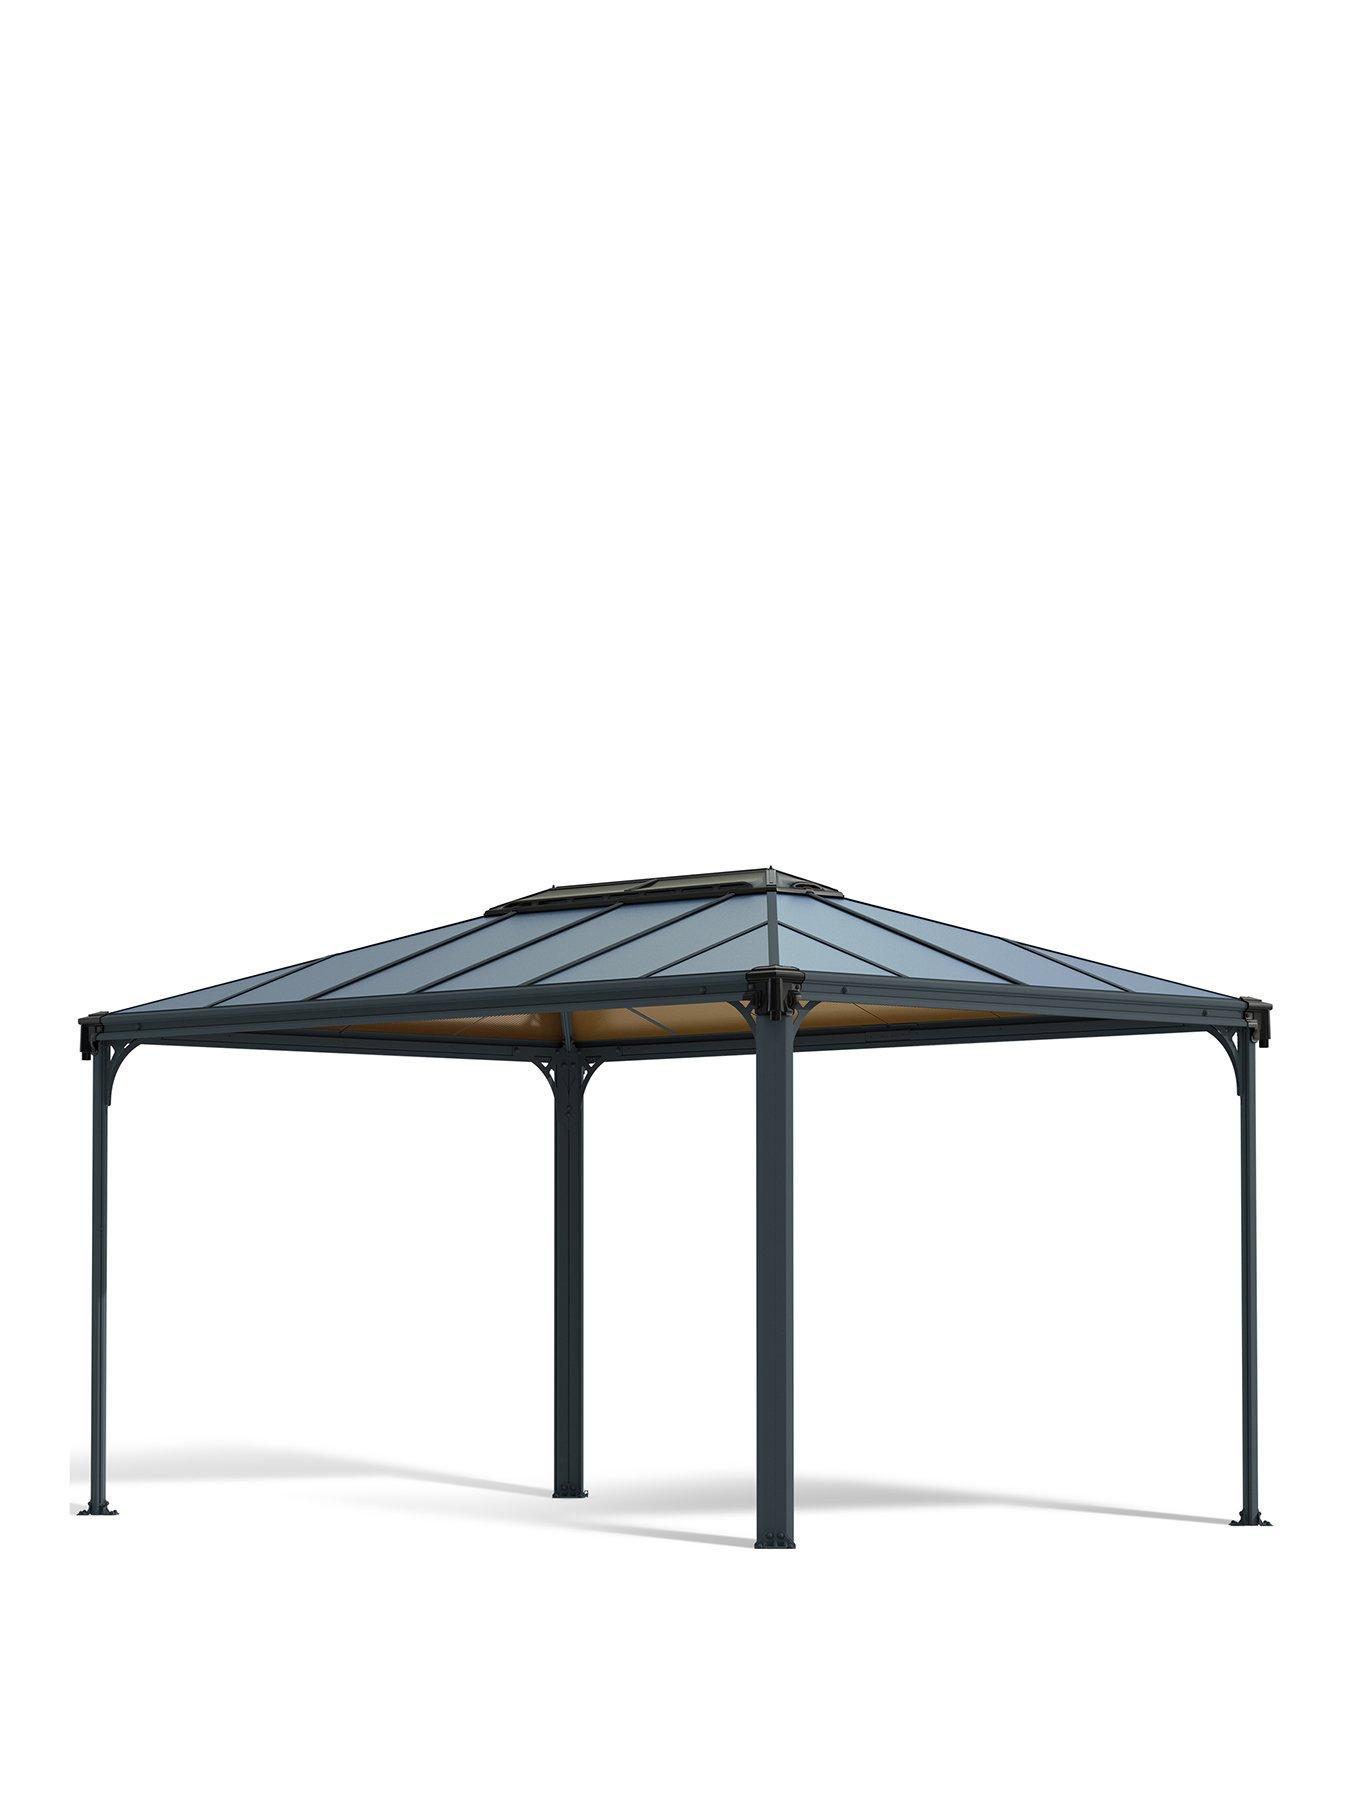 1m x 2m Unique Gazebo pop up canopy specially designed for Car Boot Sales 